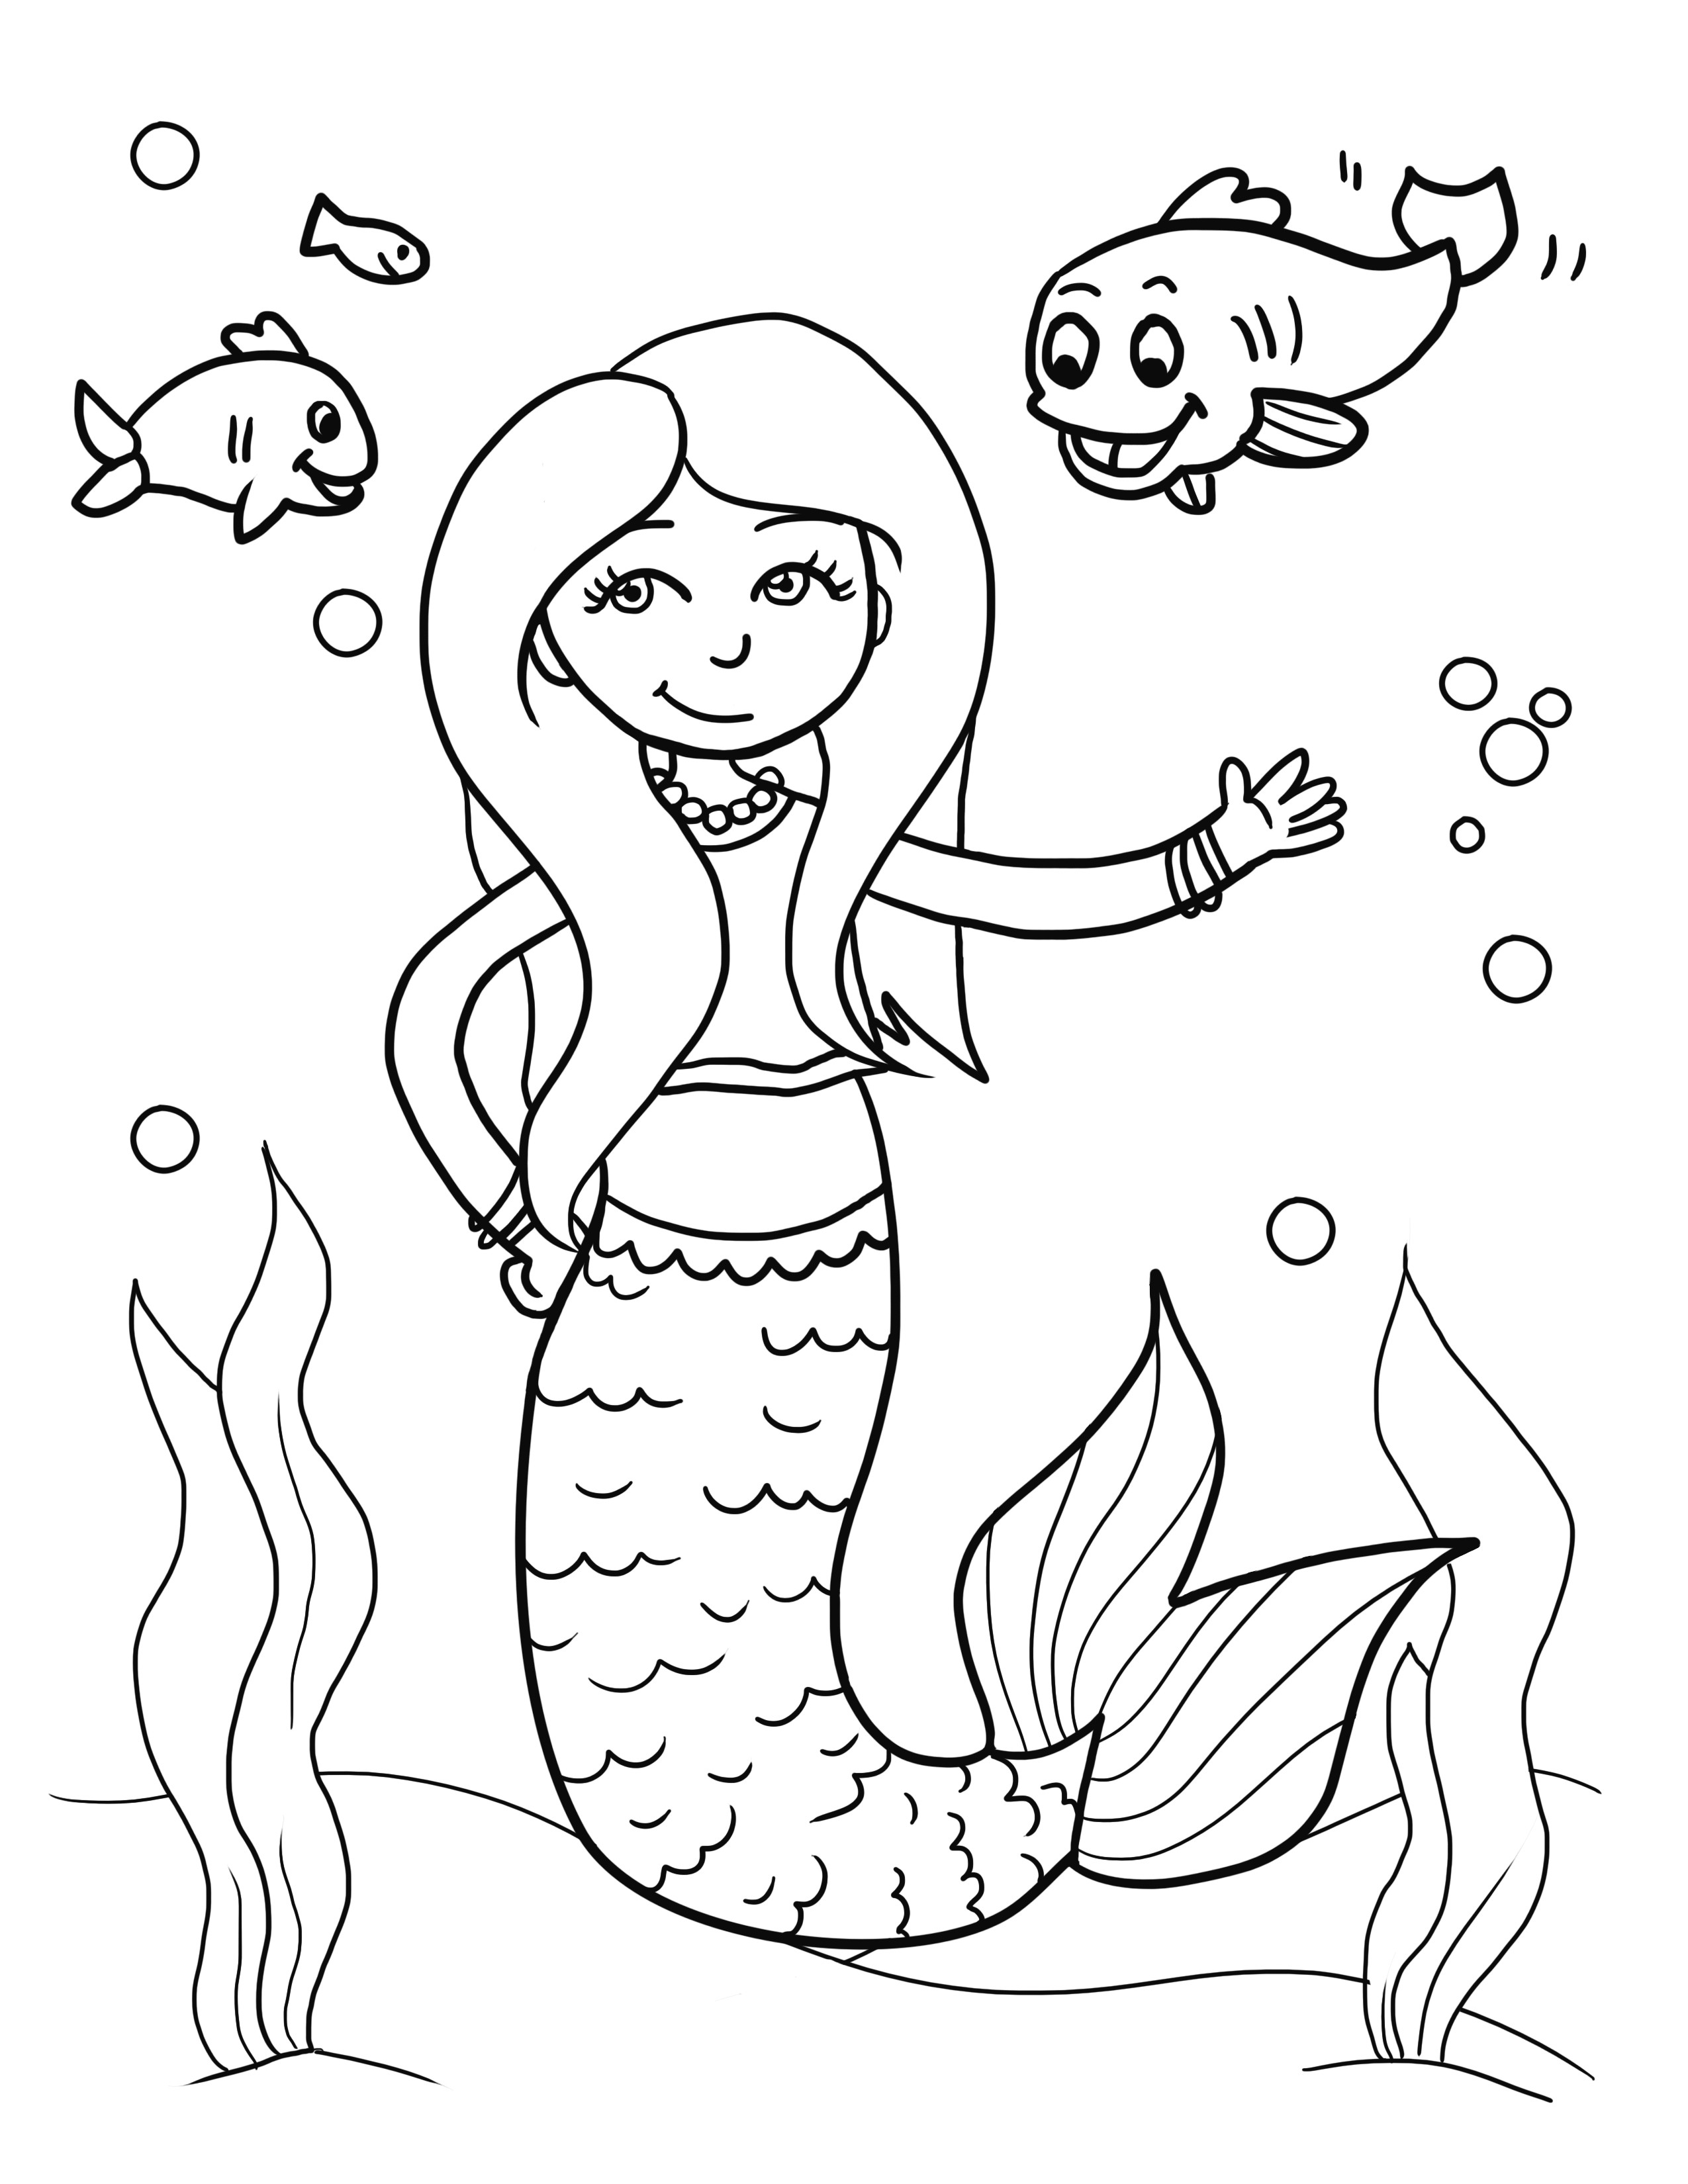 How To Draw A Mermaid Art Projects For Kids Mermaid